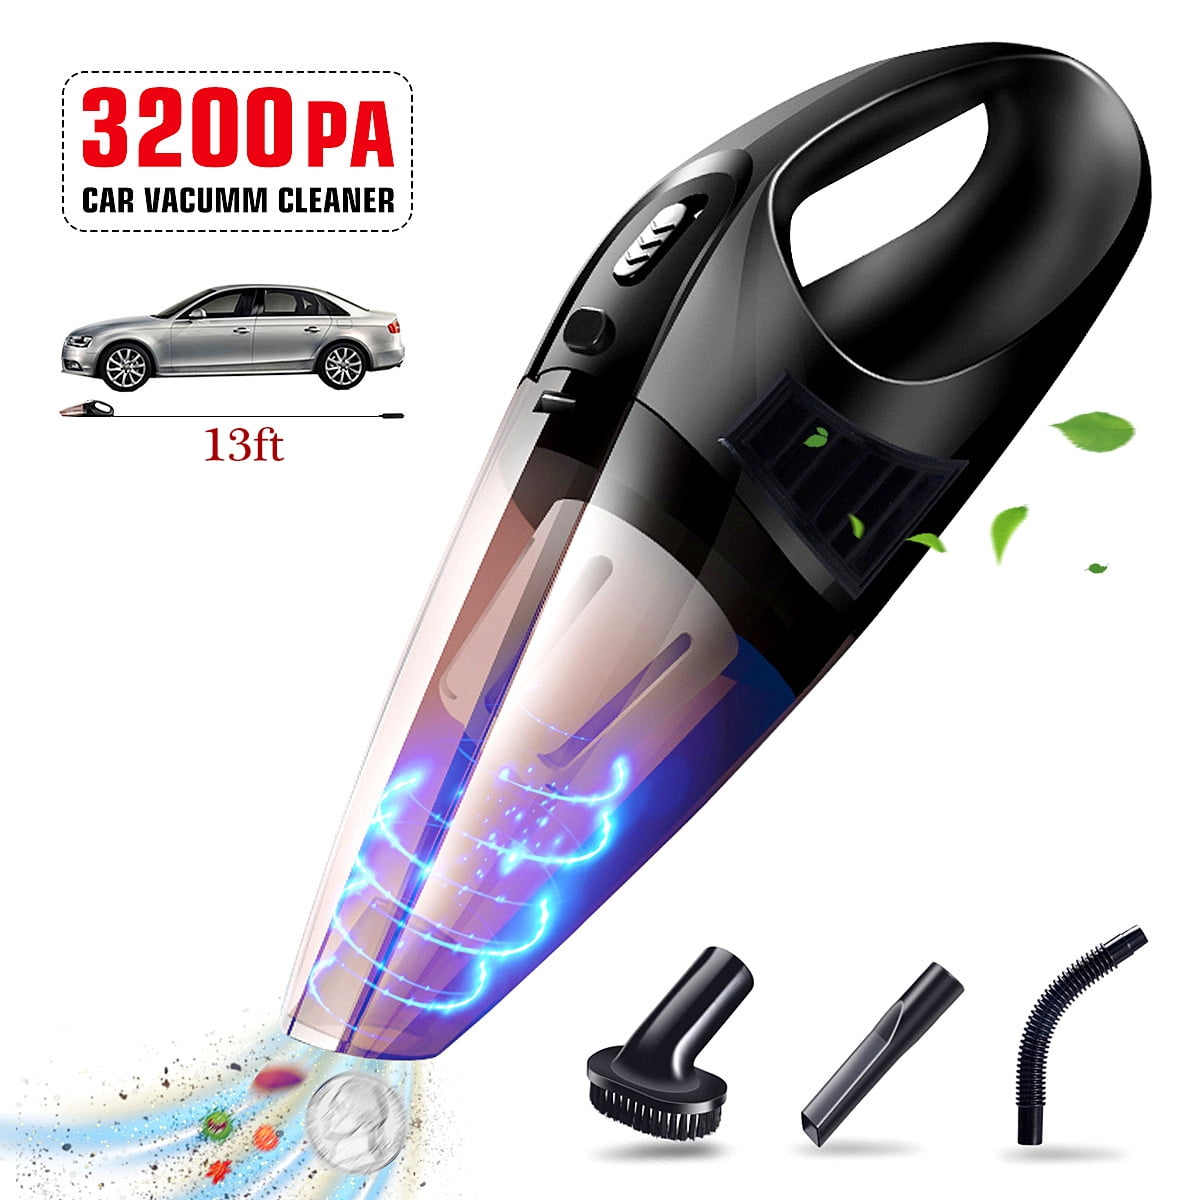 Car Cordless Vacuum Cleaner Handheld Auto Home Duster Rechargeable High Power 